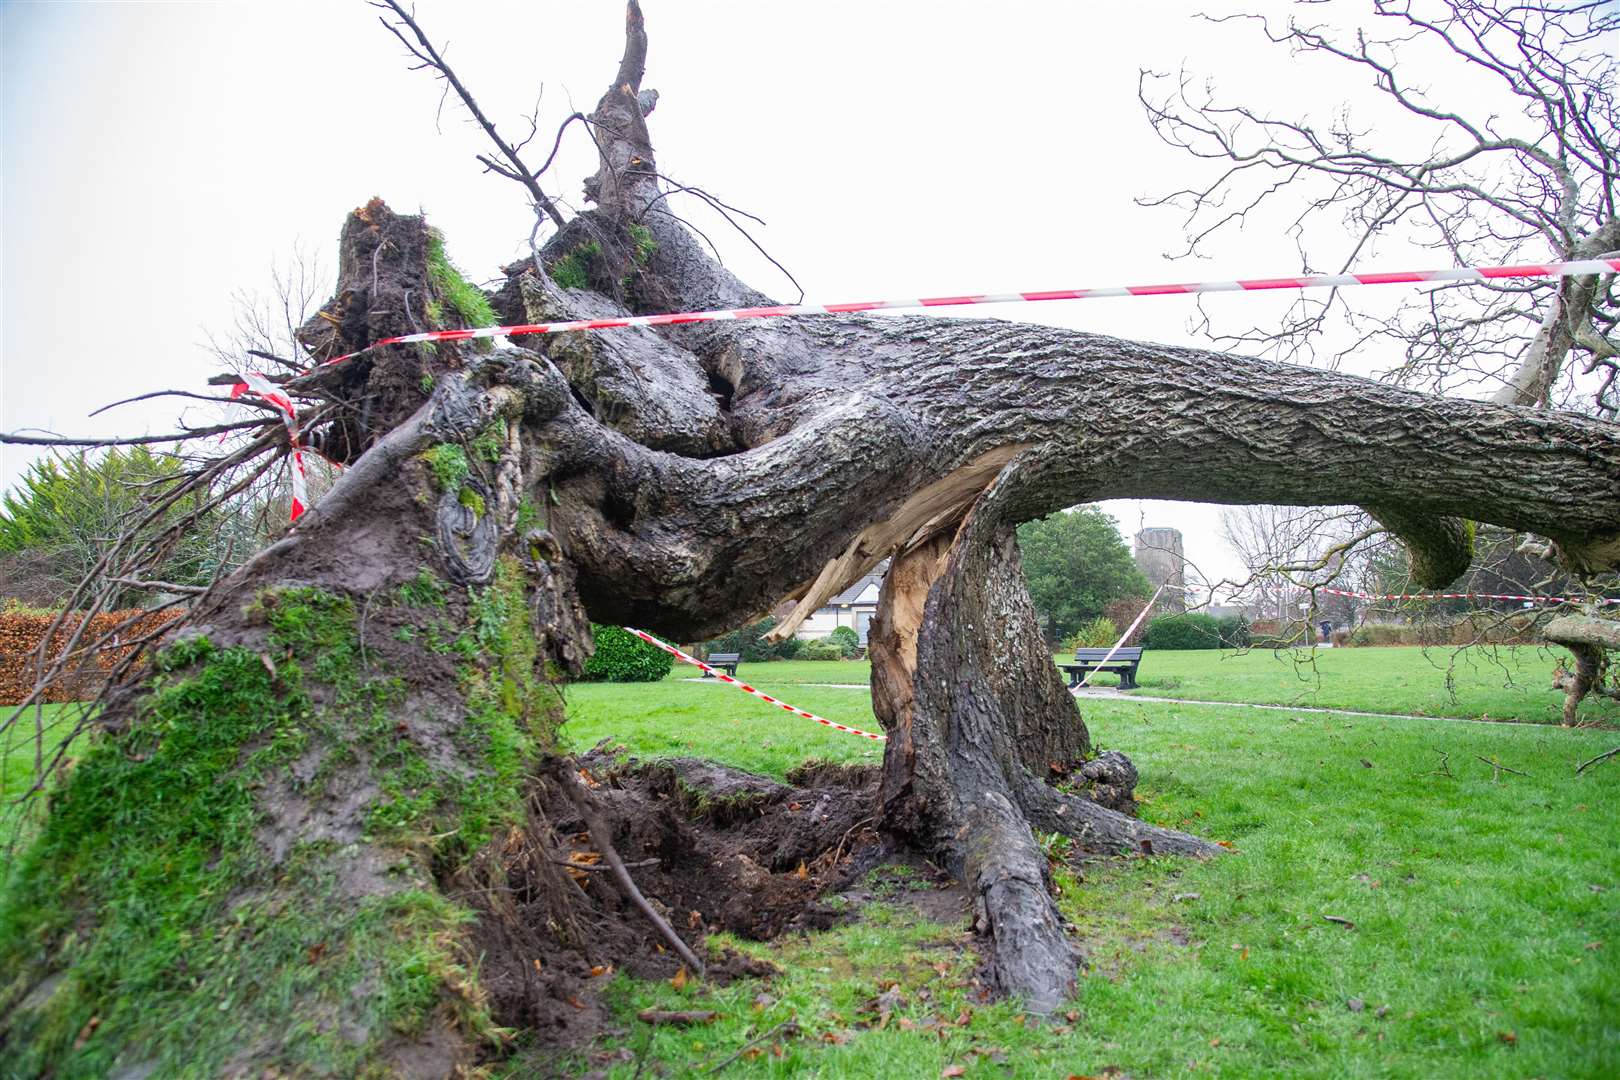 A walnut tree near Grant Lodge in Elgin was blown down by high winds during Storm Arwen. The tree was at least 300 years old, and possibly much older. Picture: Daniel Forsyth.